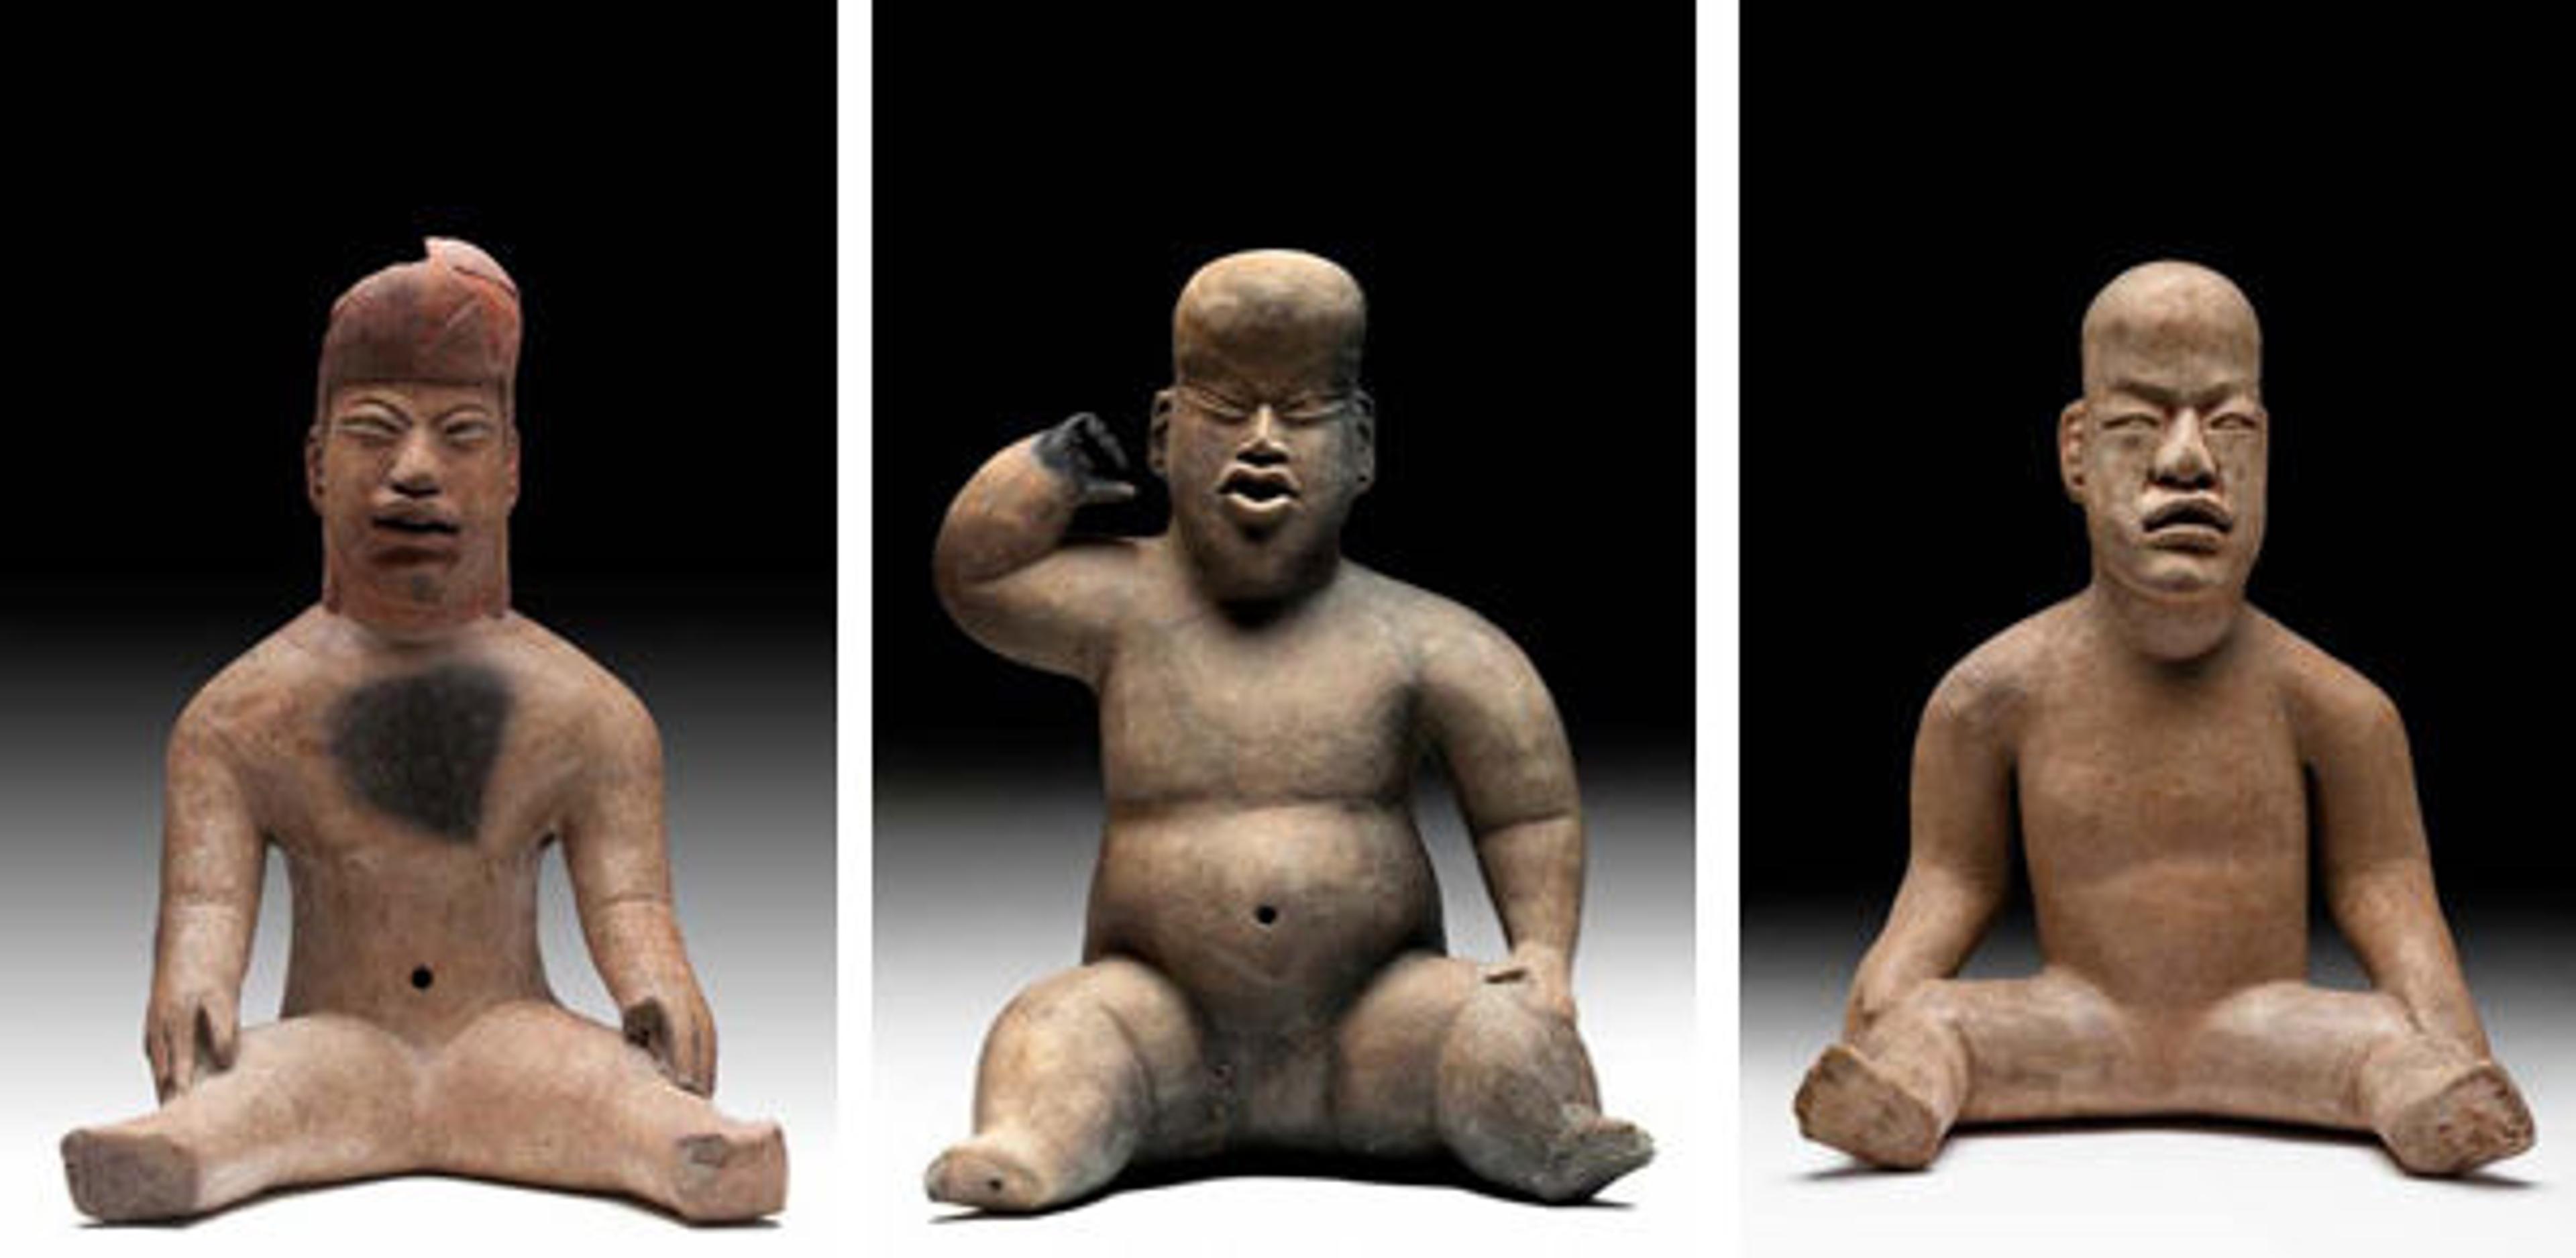 Fig. 2. Seated figures from the collections of the Museo Nacional de Antropología, Mexico. Left: Seated figure. Central Highlands. H. 40.9 x W. 29.2 x D. 23.4 cm. Center: Seated figure. Tlapacoya. H. 44 x W. 33.3 x D. 22.9 cm. Right: Seated figure. La Cruz del Milagro, Veracruz. H. 30.3 x W. 24.6 x D. 16.5 cm